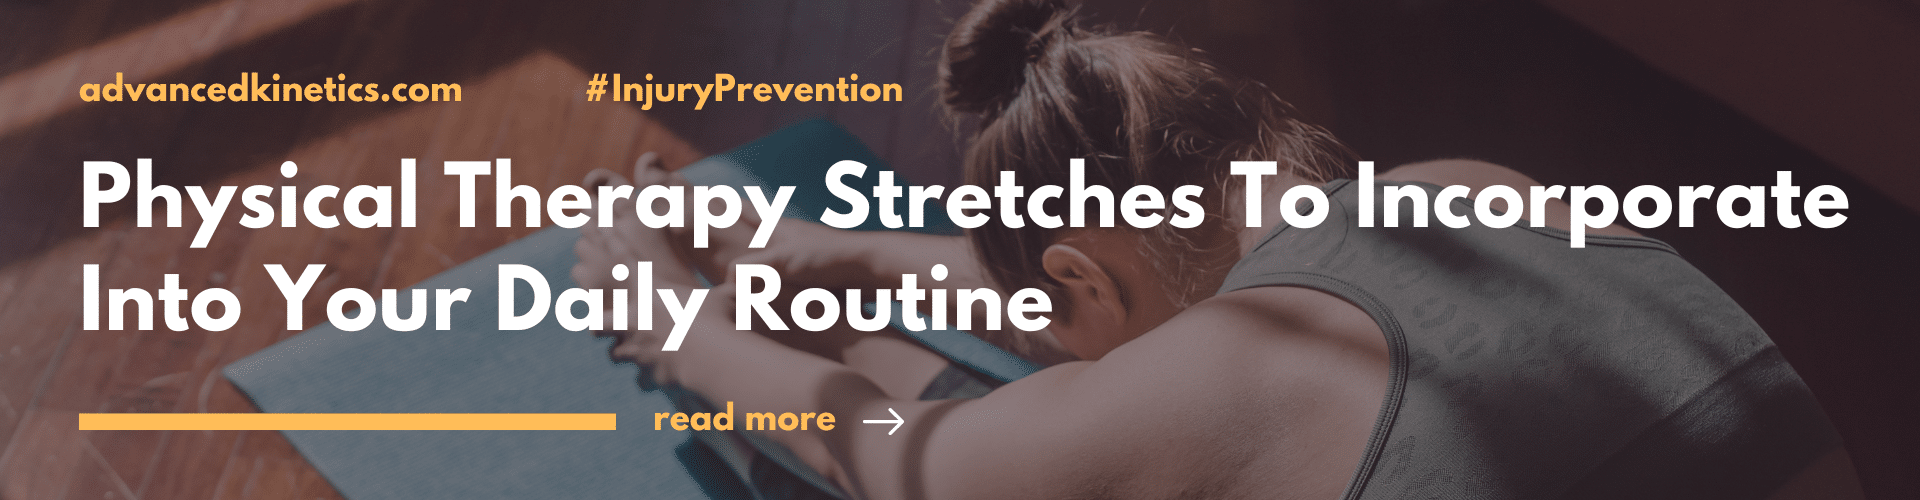 Physical Therapy Stretches To Incorporate Into Your Daily Routine